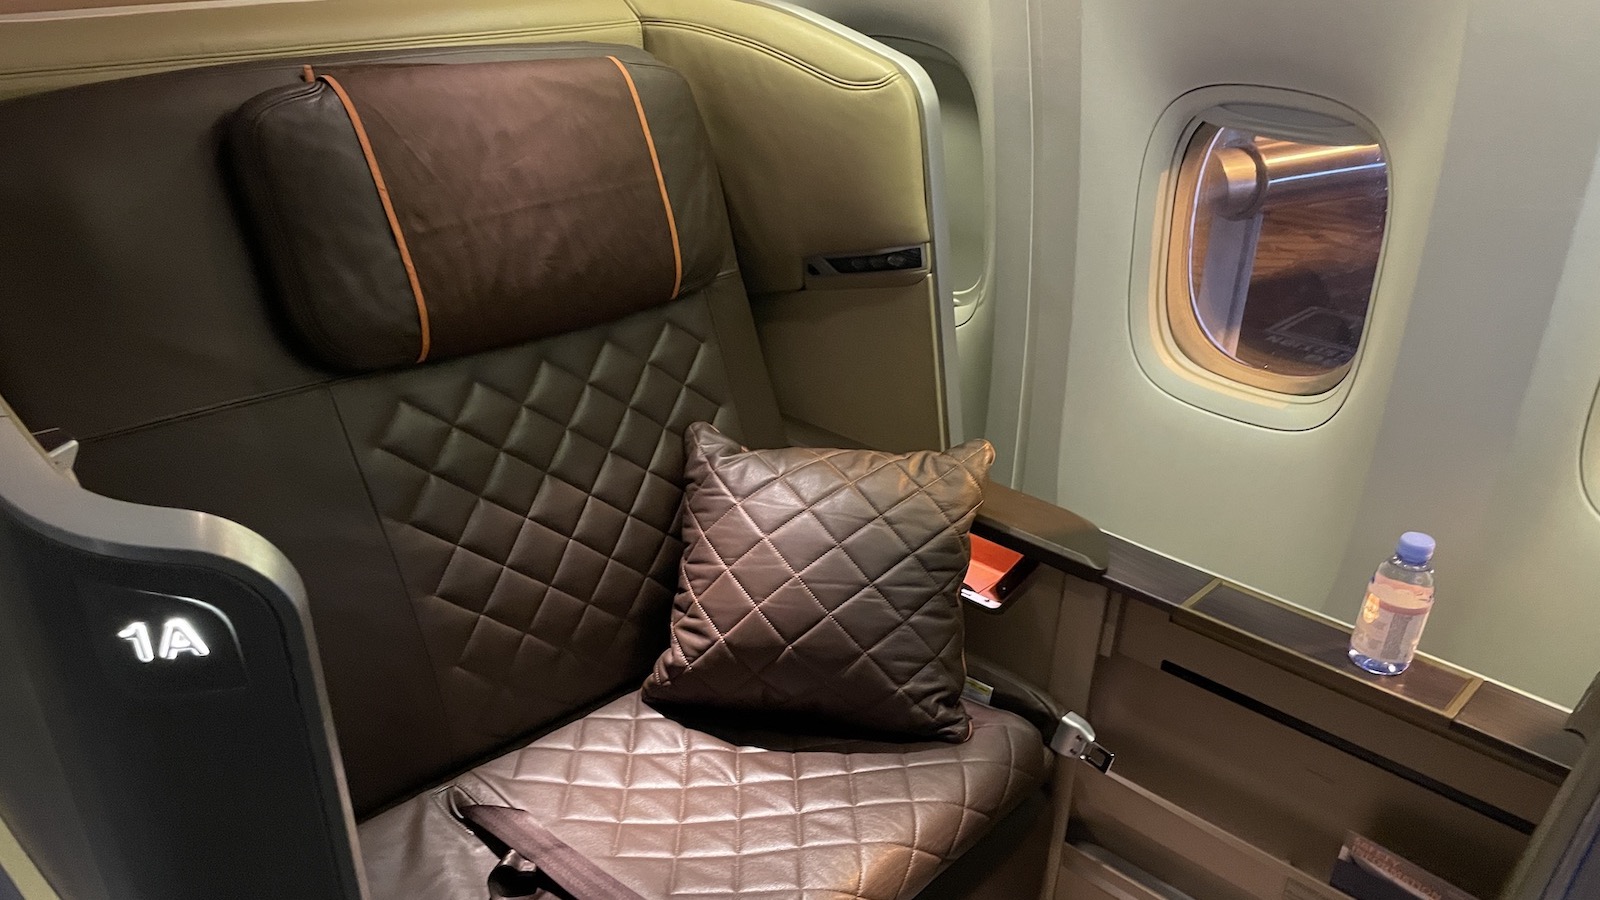 Welcome to Singapore Airlines First Class